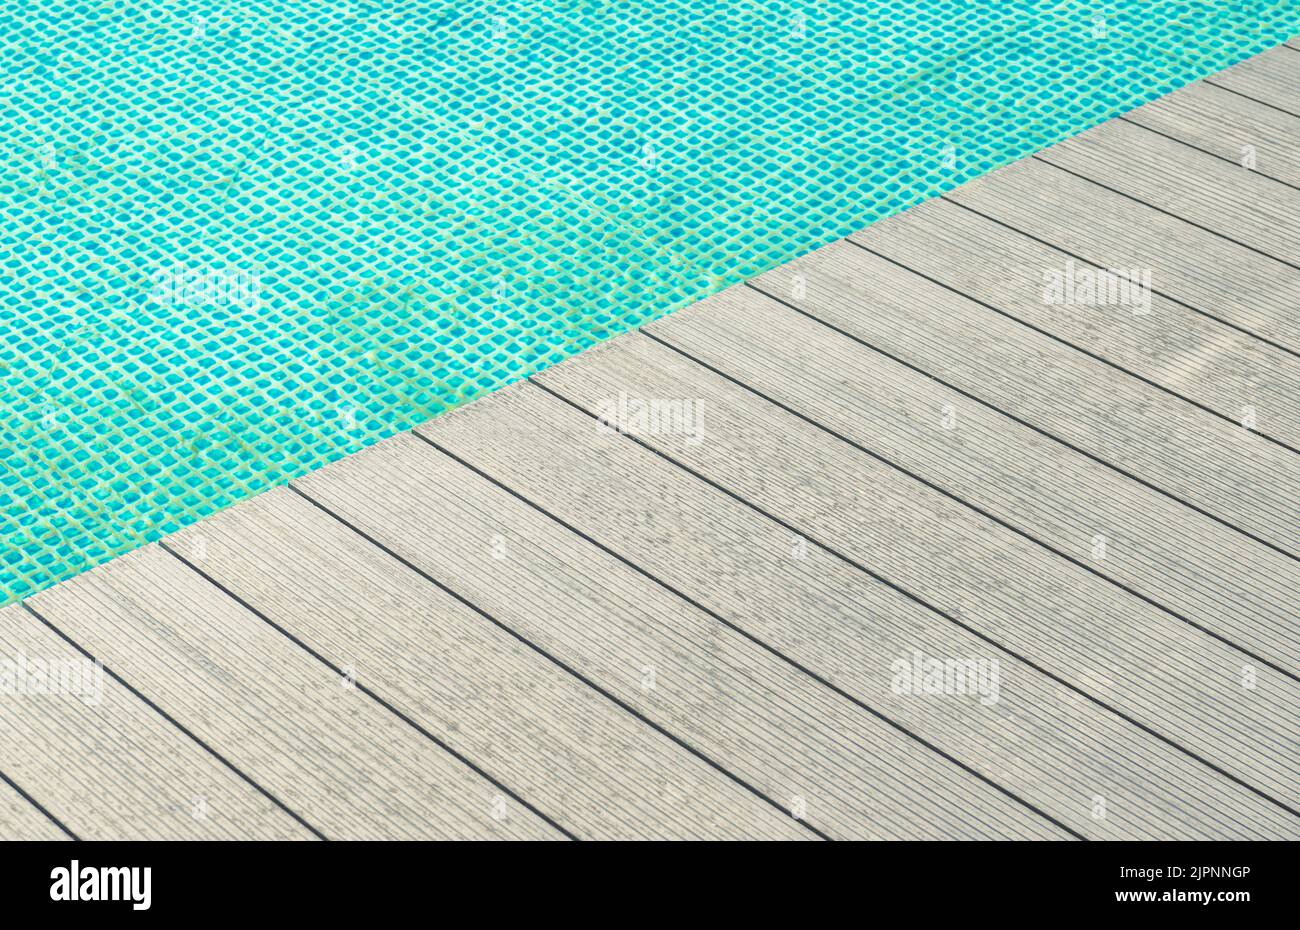 Modern Composite Made Swimming Pool Front Deck. Small Architecture Elements. Stock Photo